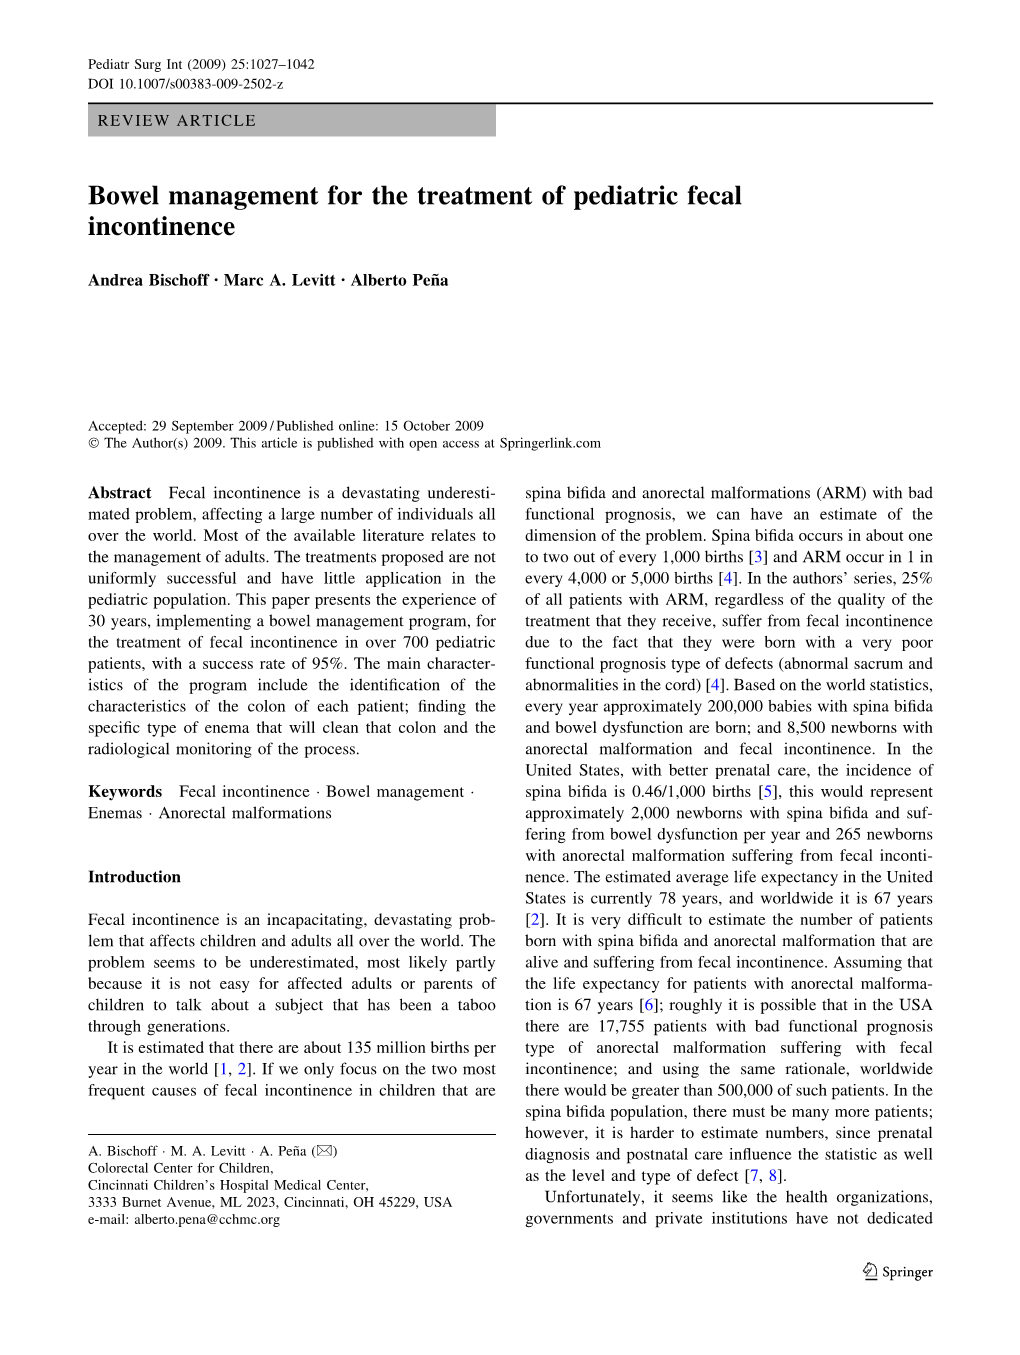 Bowel Management for the Treatment of Pediatric Fecal Incontinence